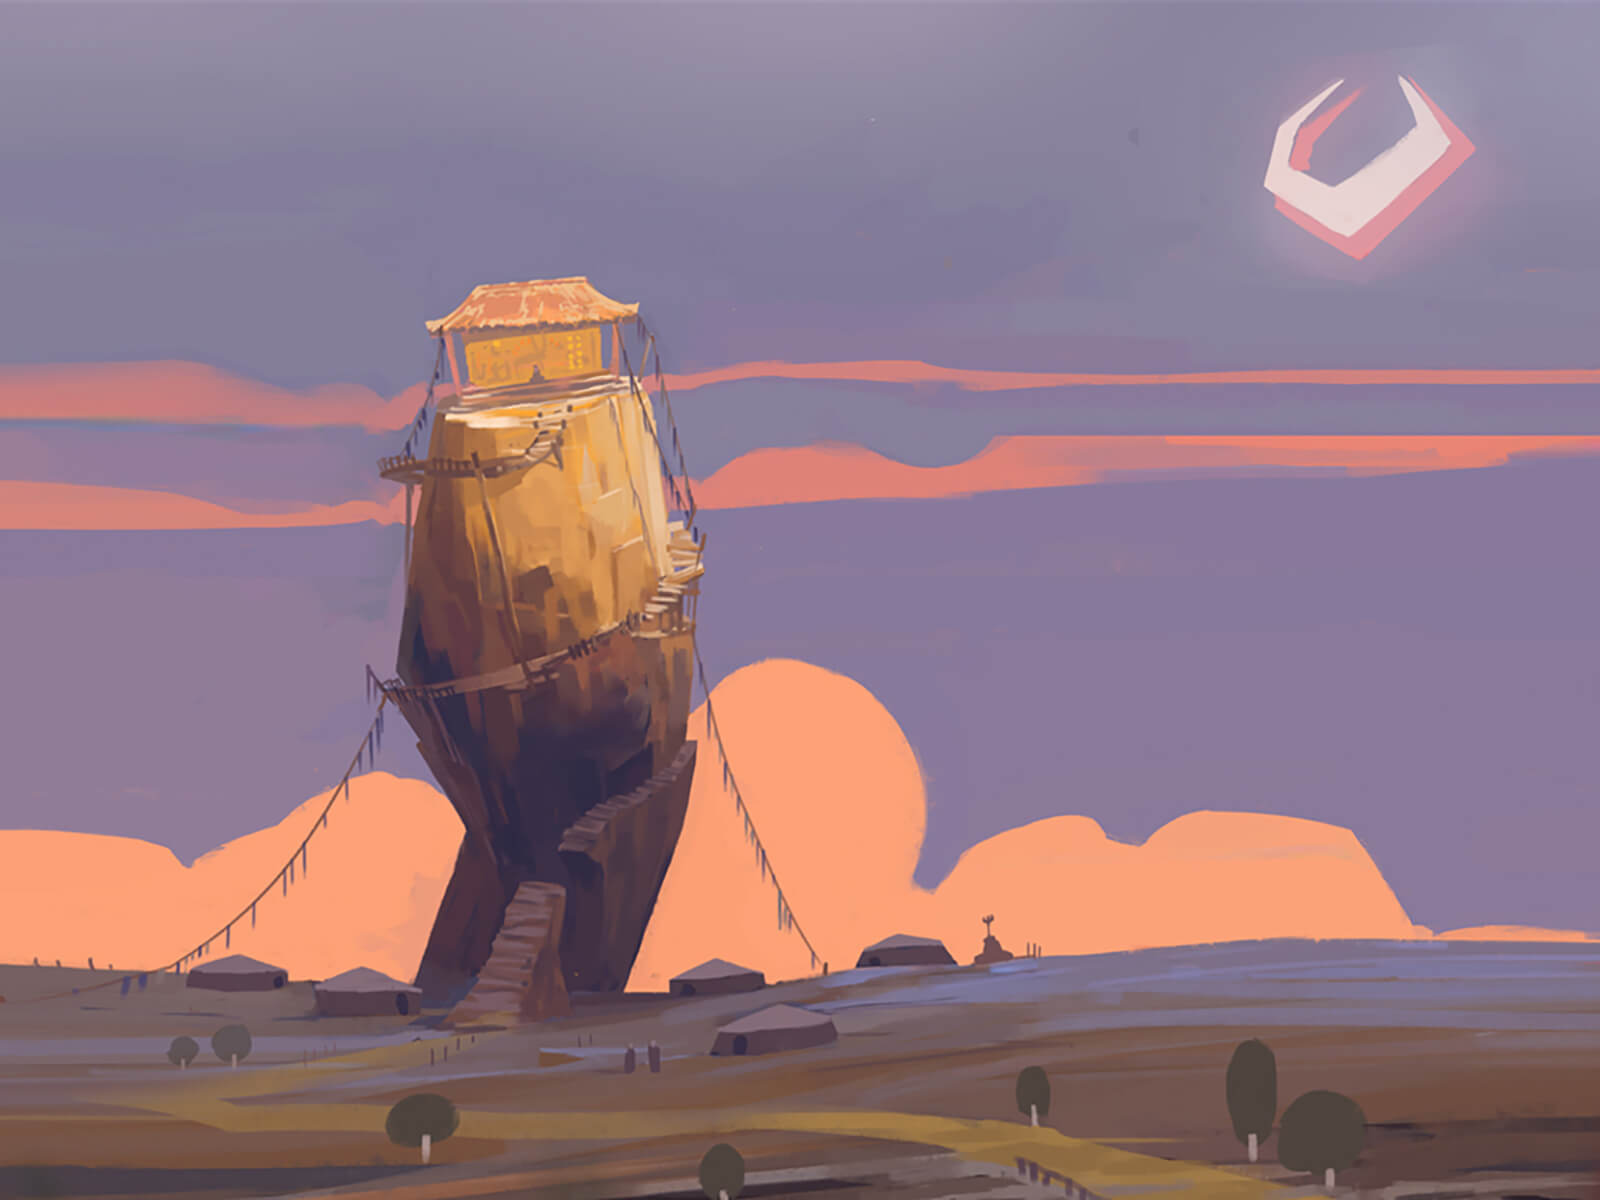 Stylized desert-like landscape in pastel colors. A ramshackle hut sits atop a tilted rock outcropping surrounded by tents.